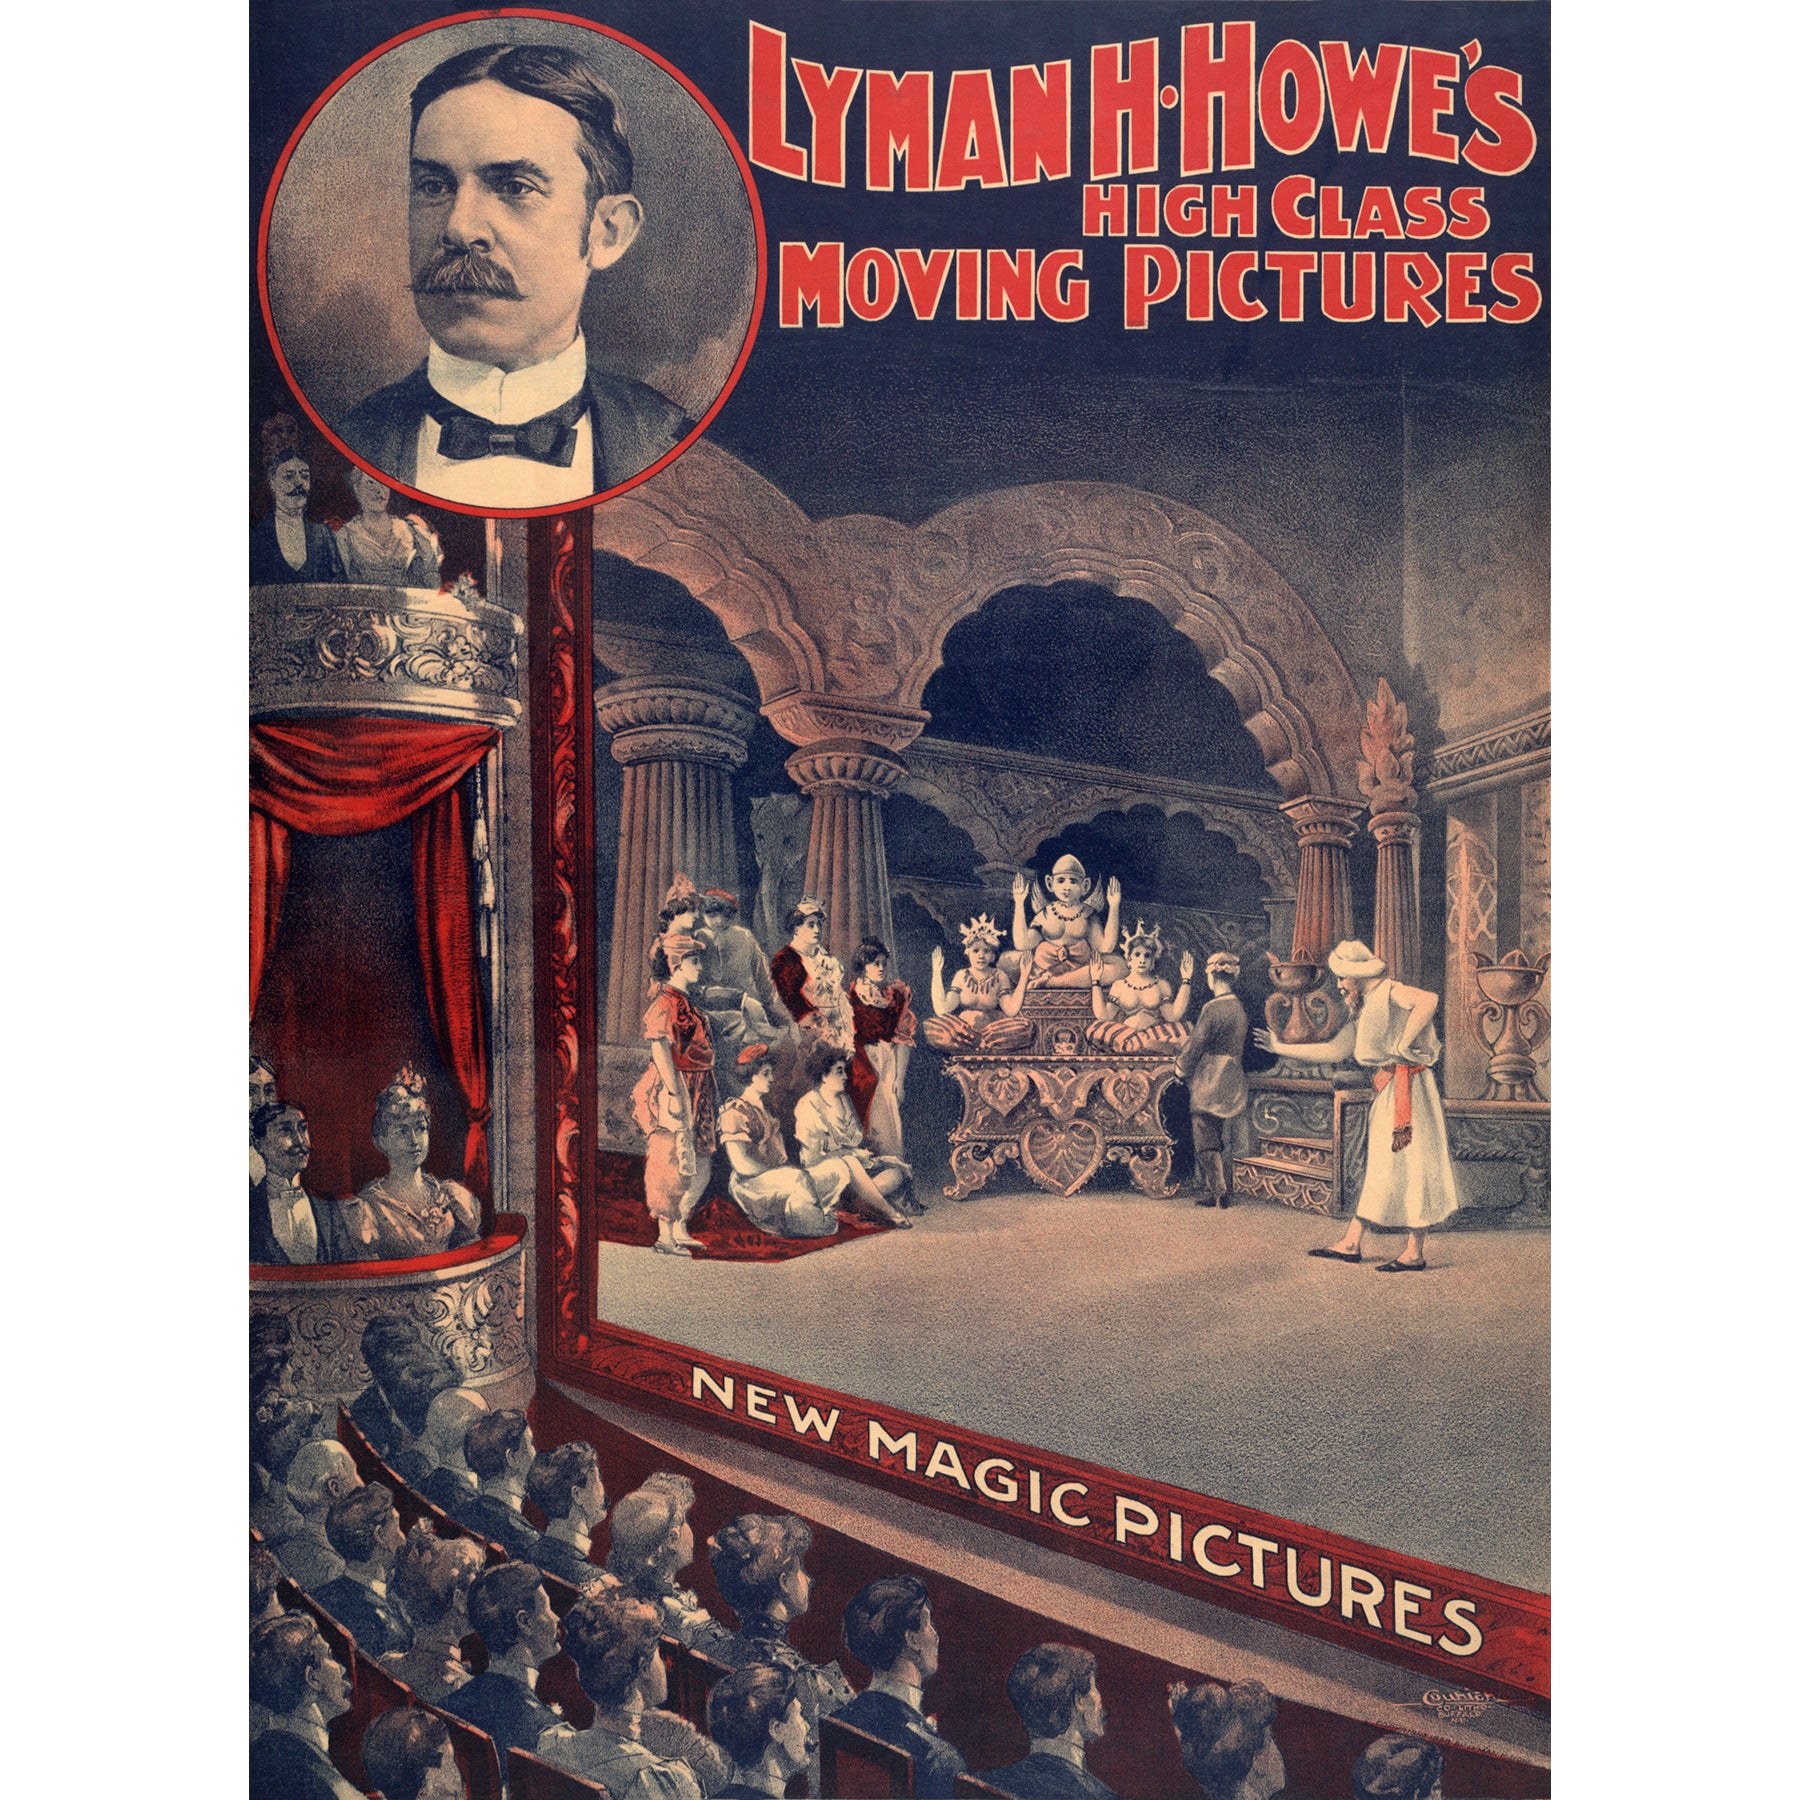 A vintage poster advertising Lyman H Howe's moving pictures